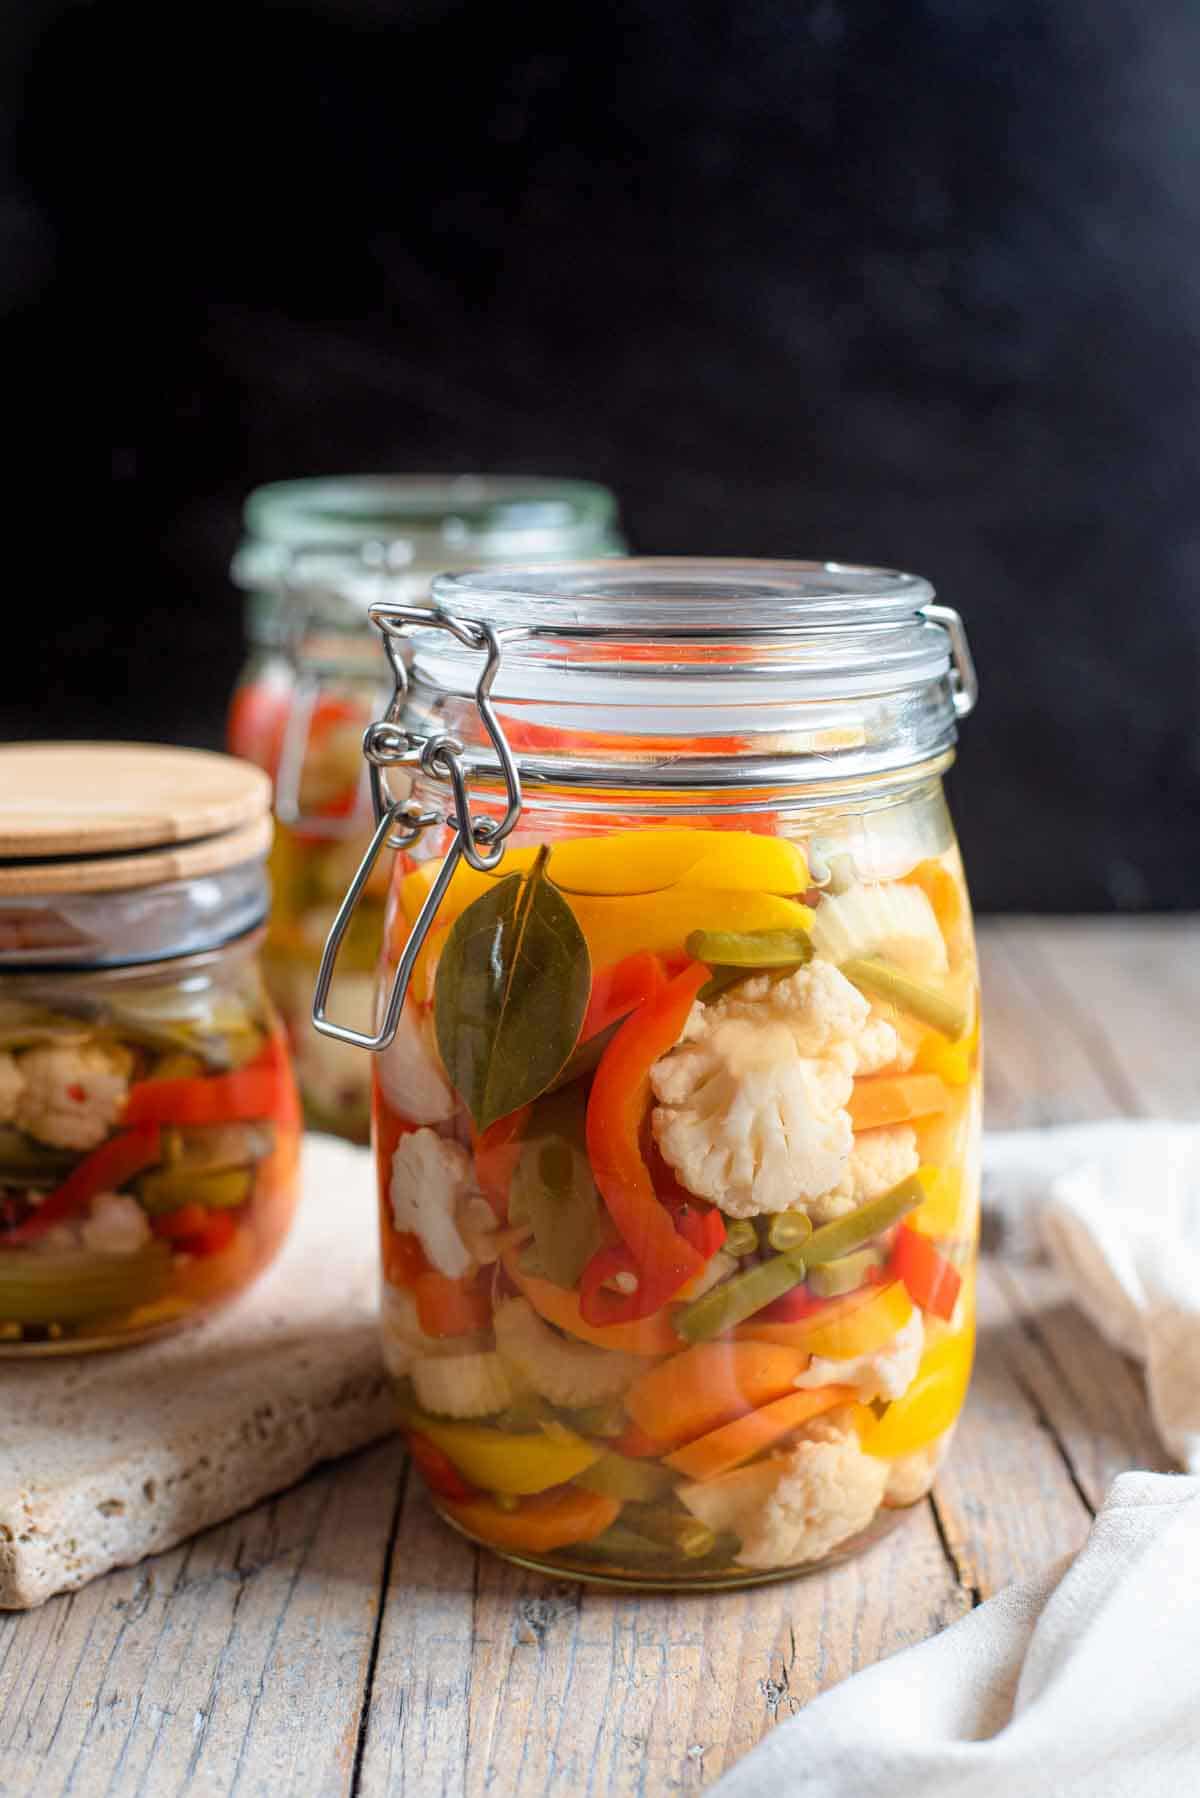 A close up of Giardiniera pickled vegetables in a glass jar